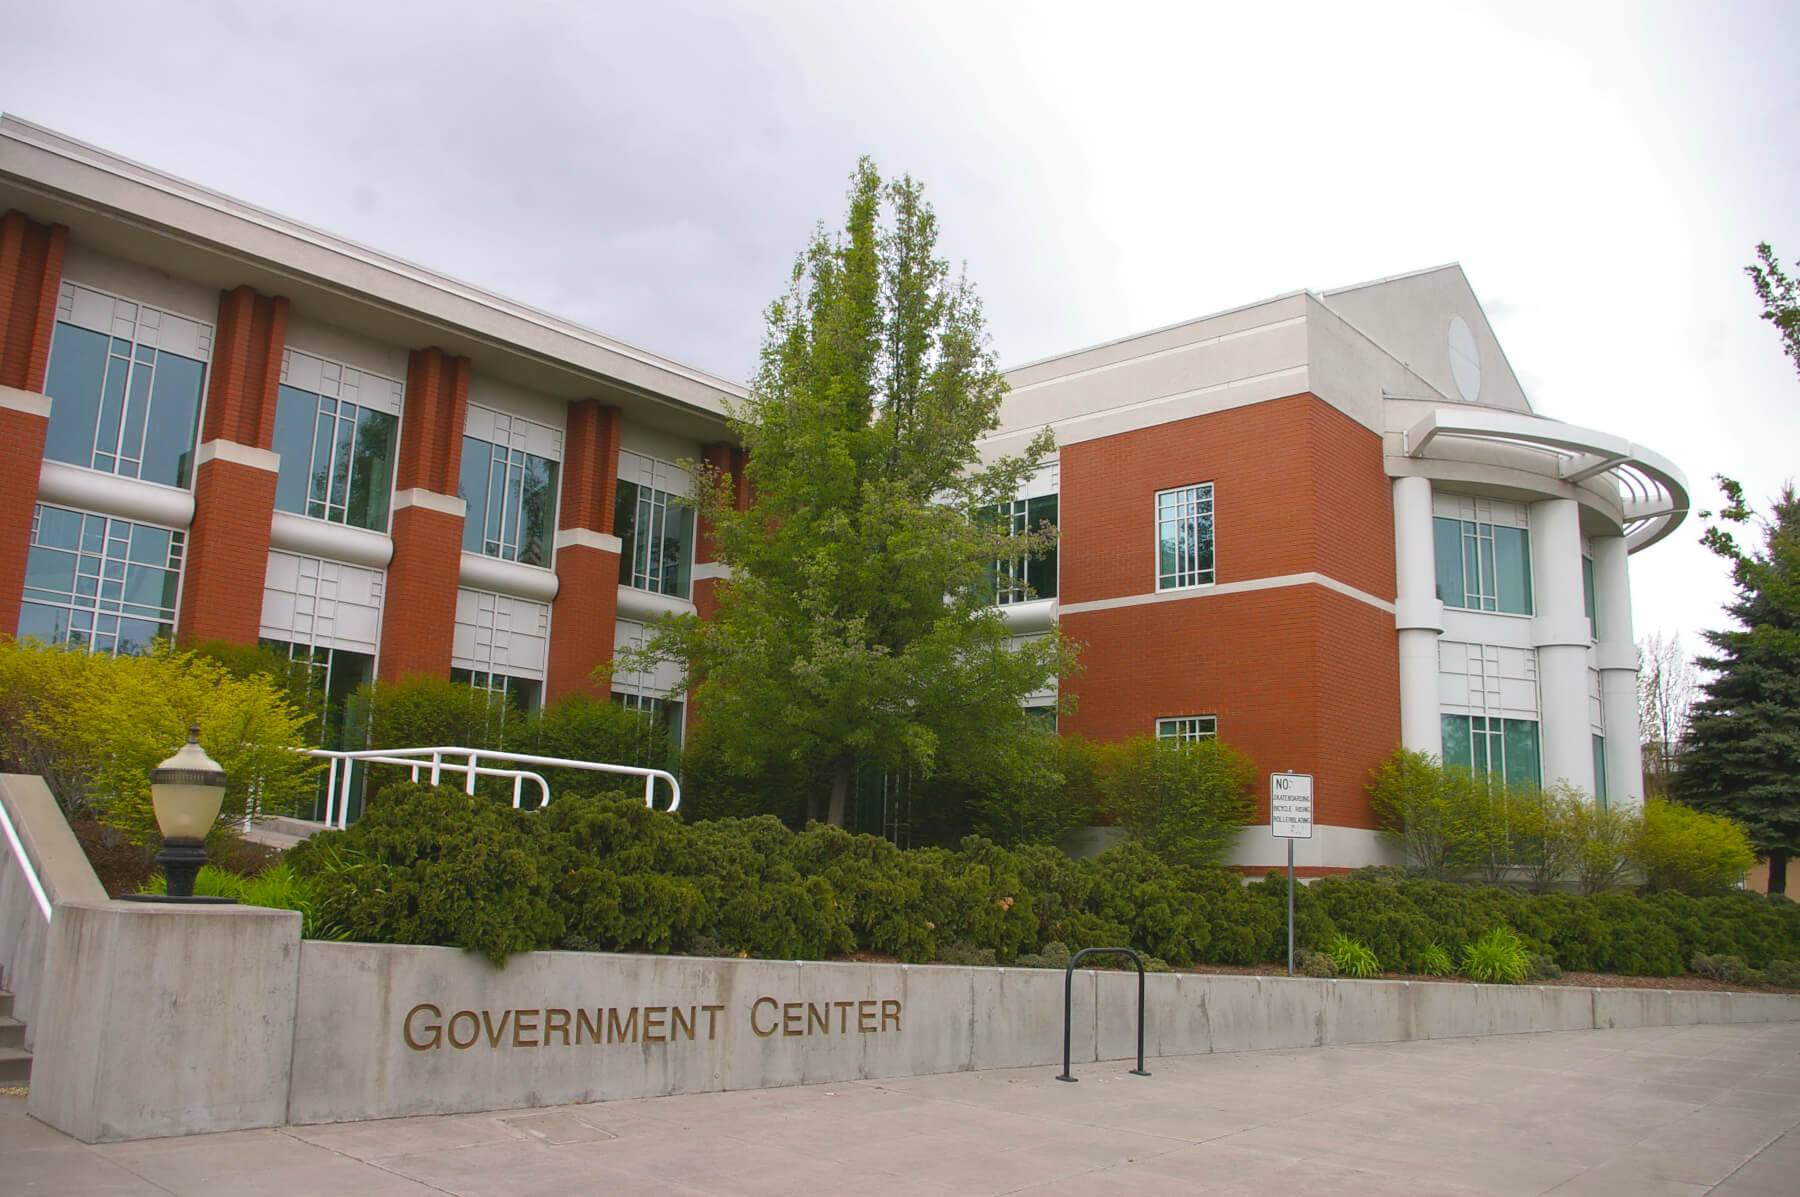 Image of the Klamath County Admin Building, designed by architect Jeff Finsand.